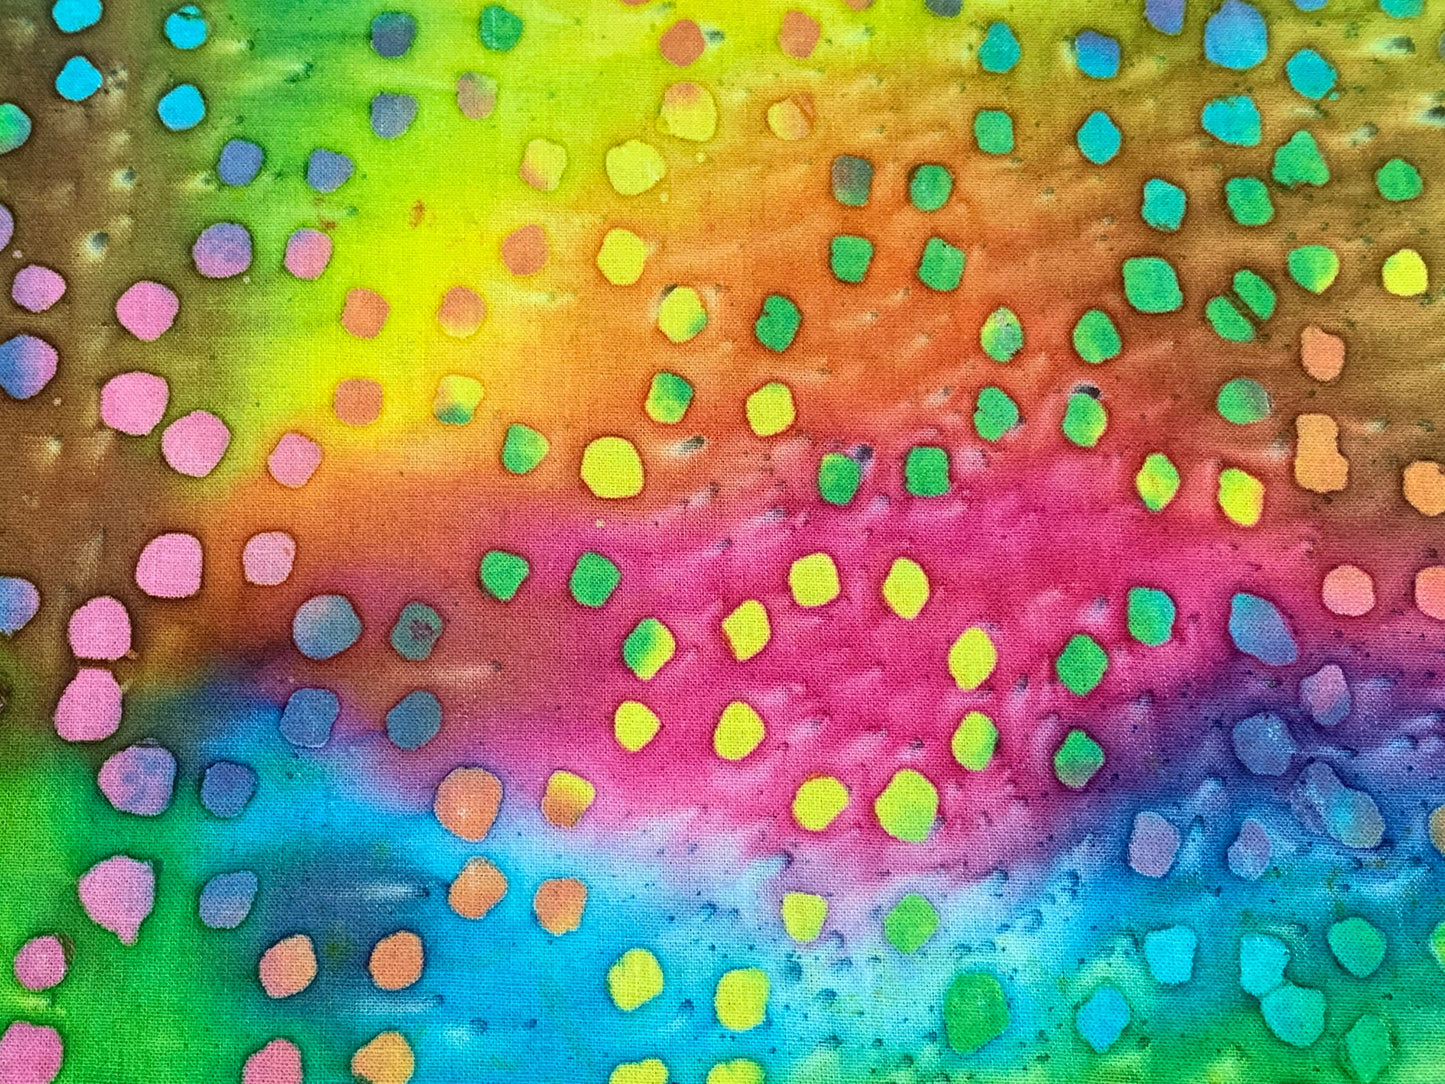 Indian Batik Fabric by the YARD. Hand Dyed Bright Rainbow with Dots Tie Dyed Fabric. 100% Cotton Fabric for Quilting, Apparel, Home Décor